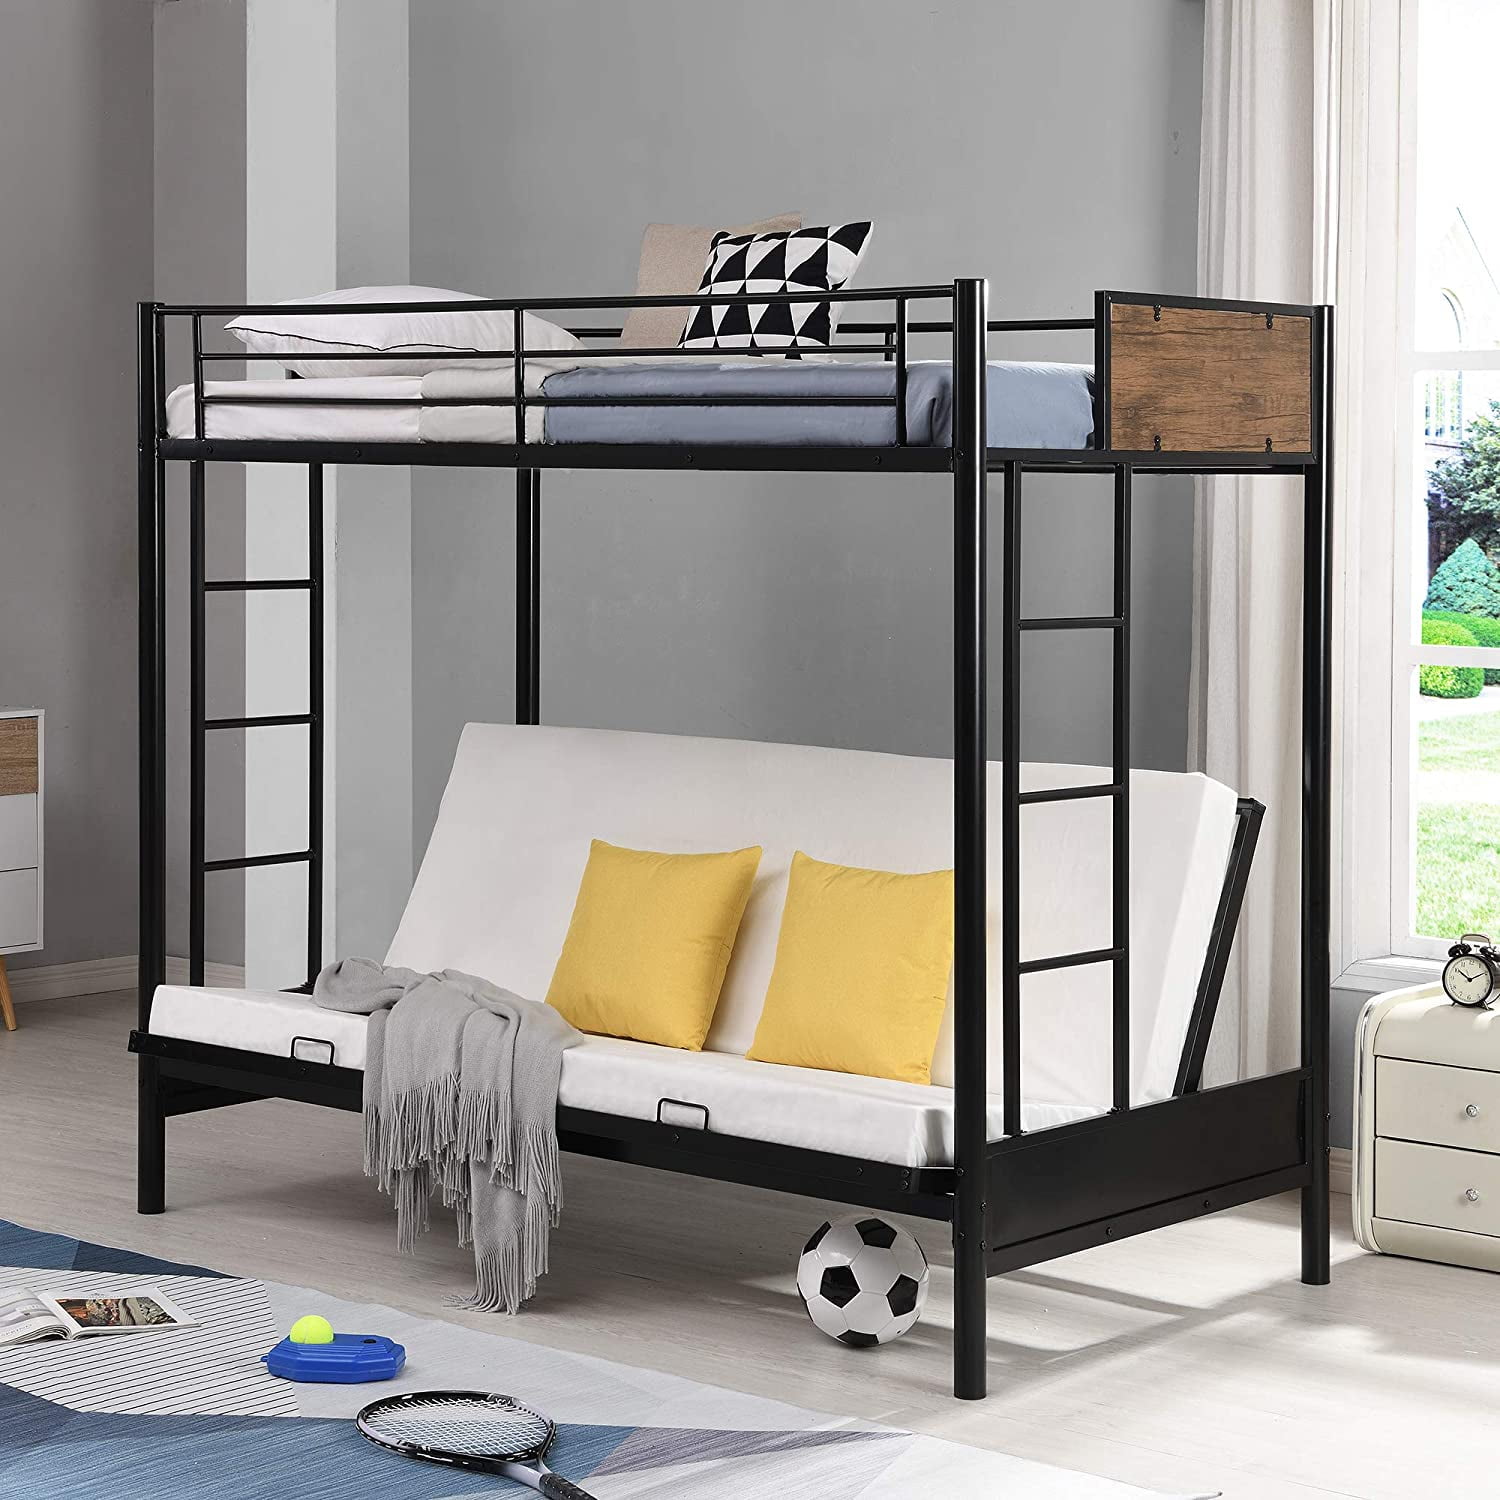 Piscis Convertible Twin Over Futon Bed, Full Size Futon Bunk Bed